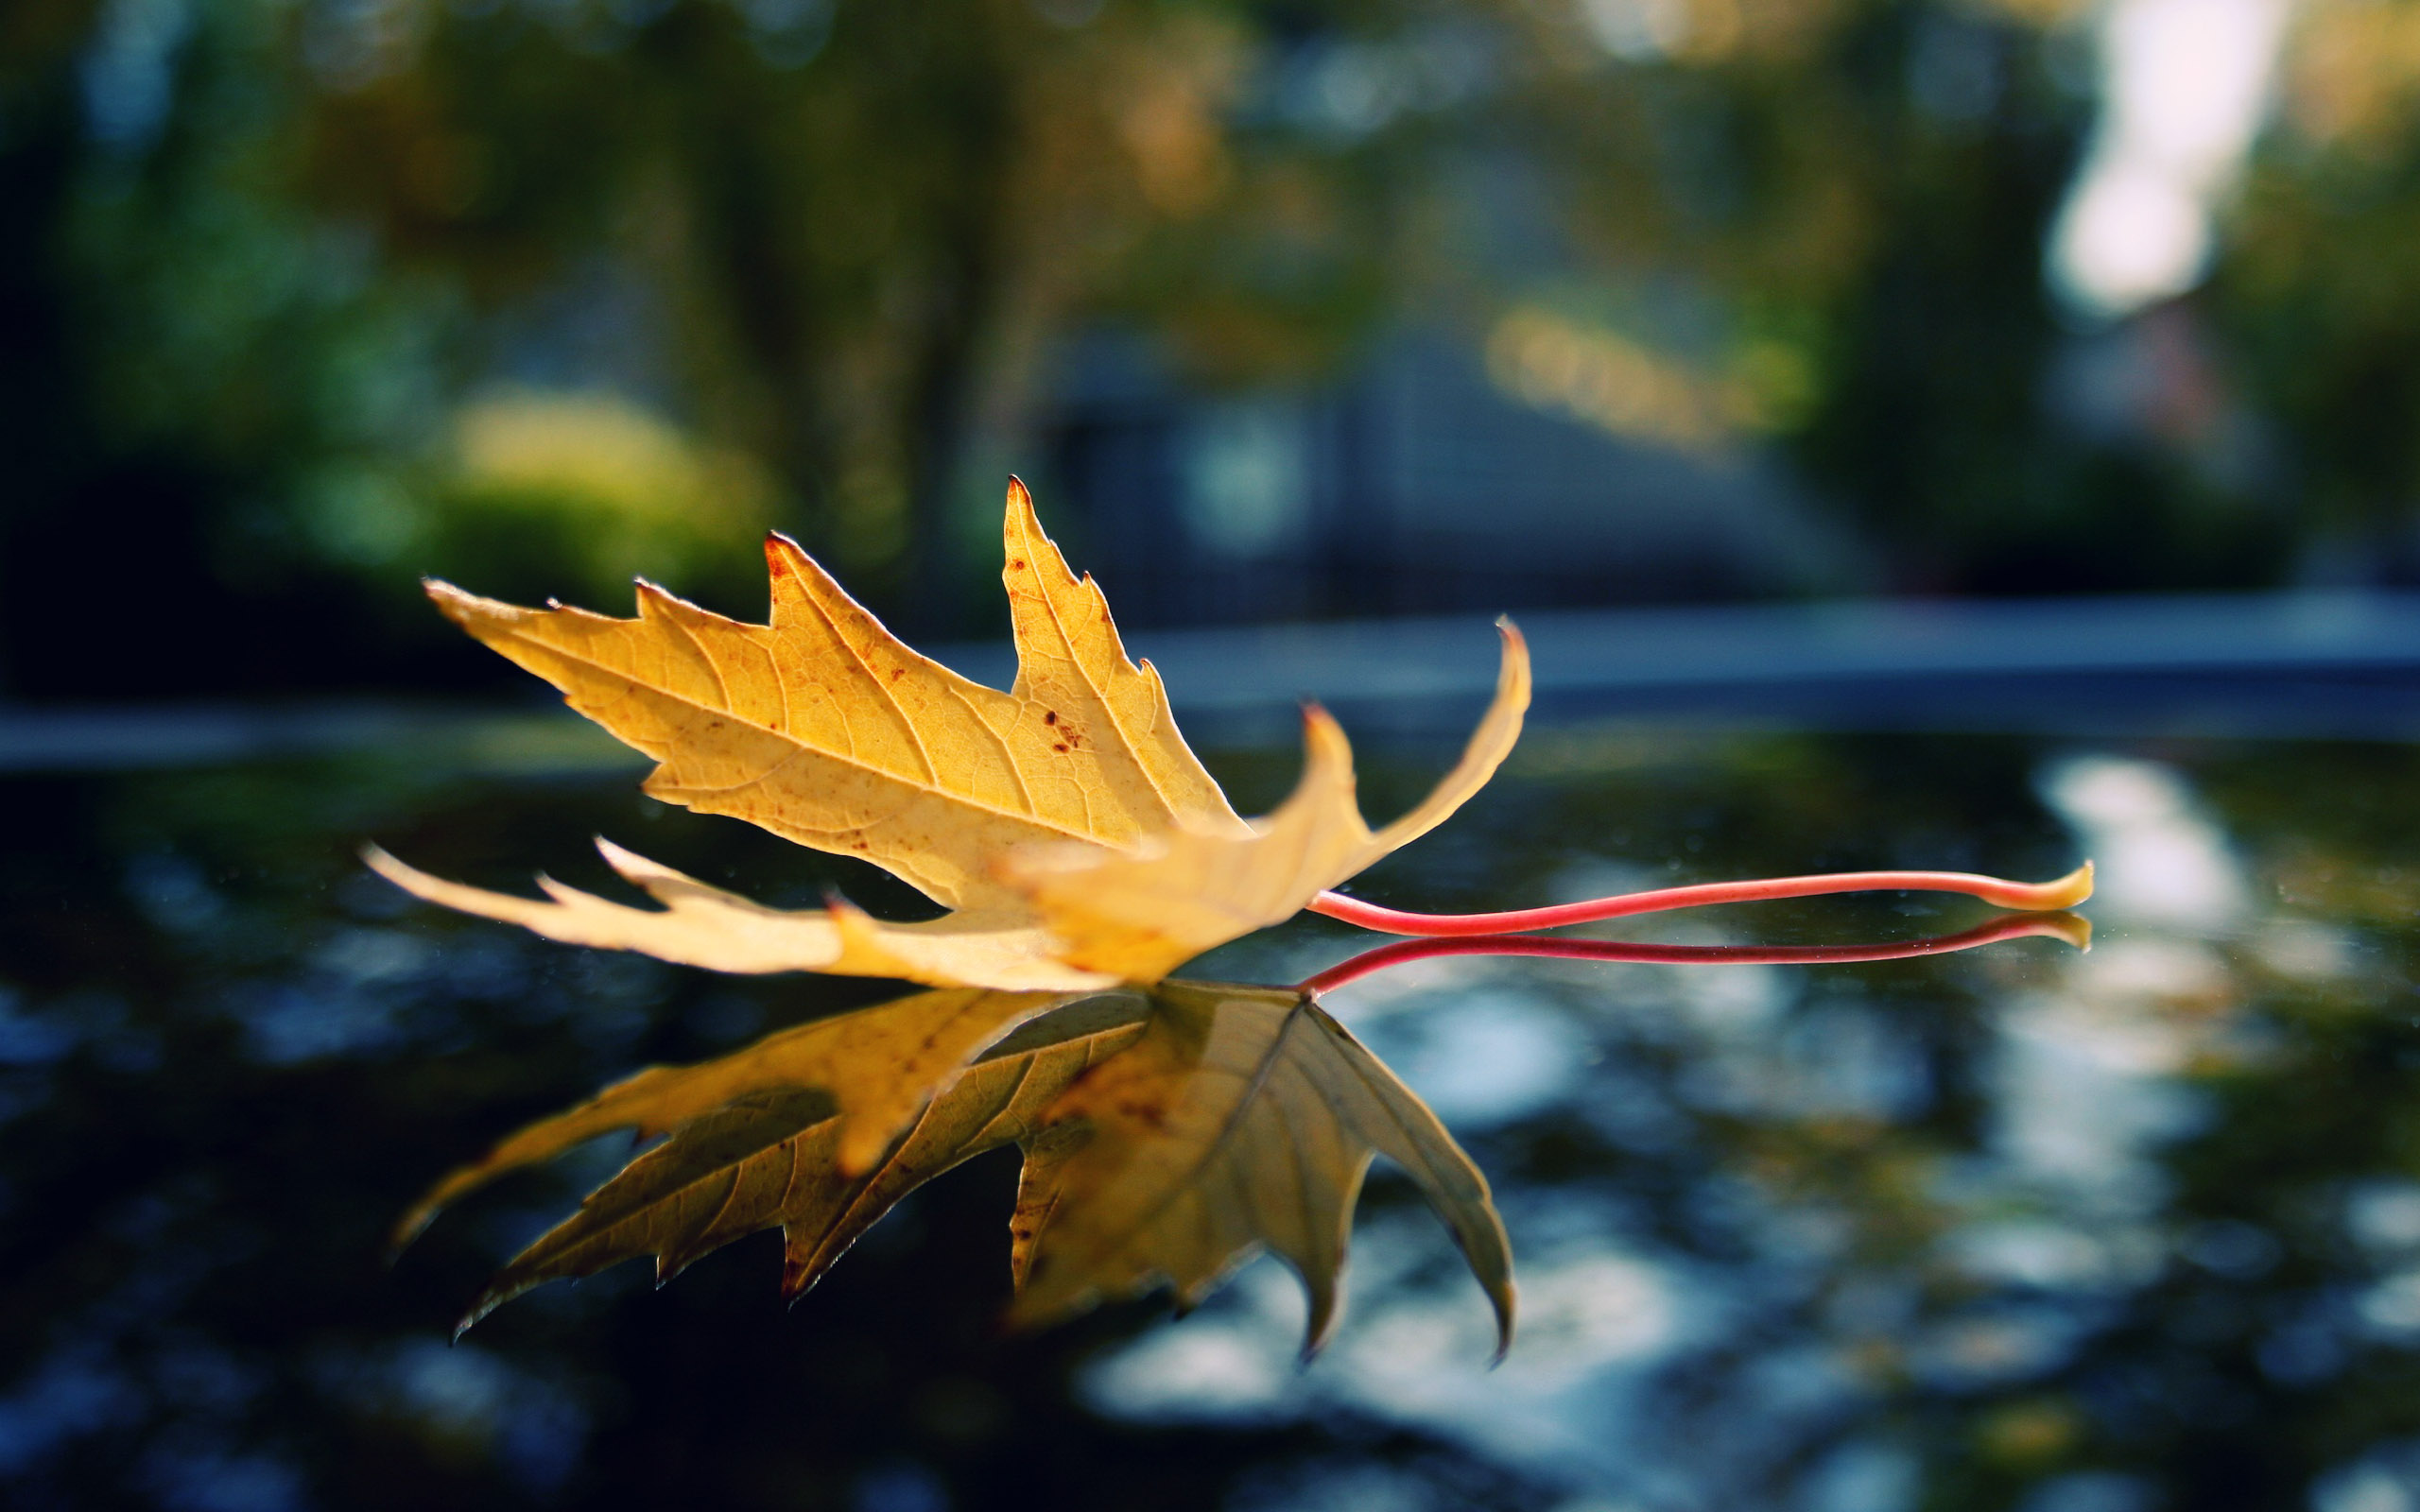 hd wallpapers for pc,leaf,maple leaf,tree,sky,yellow